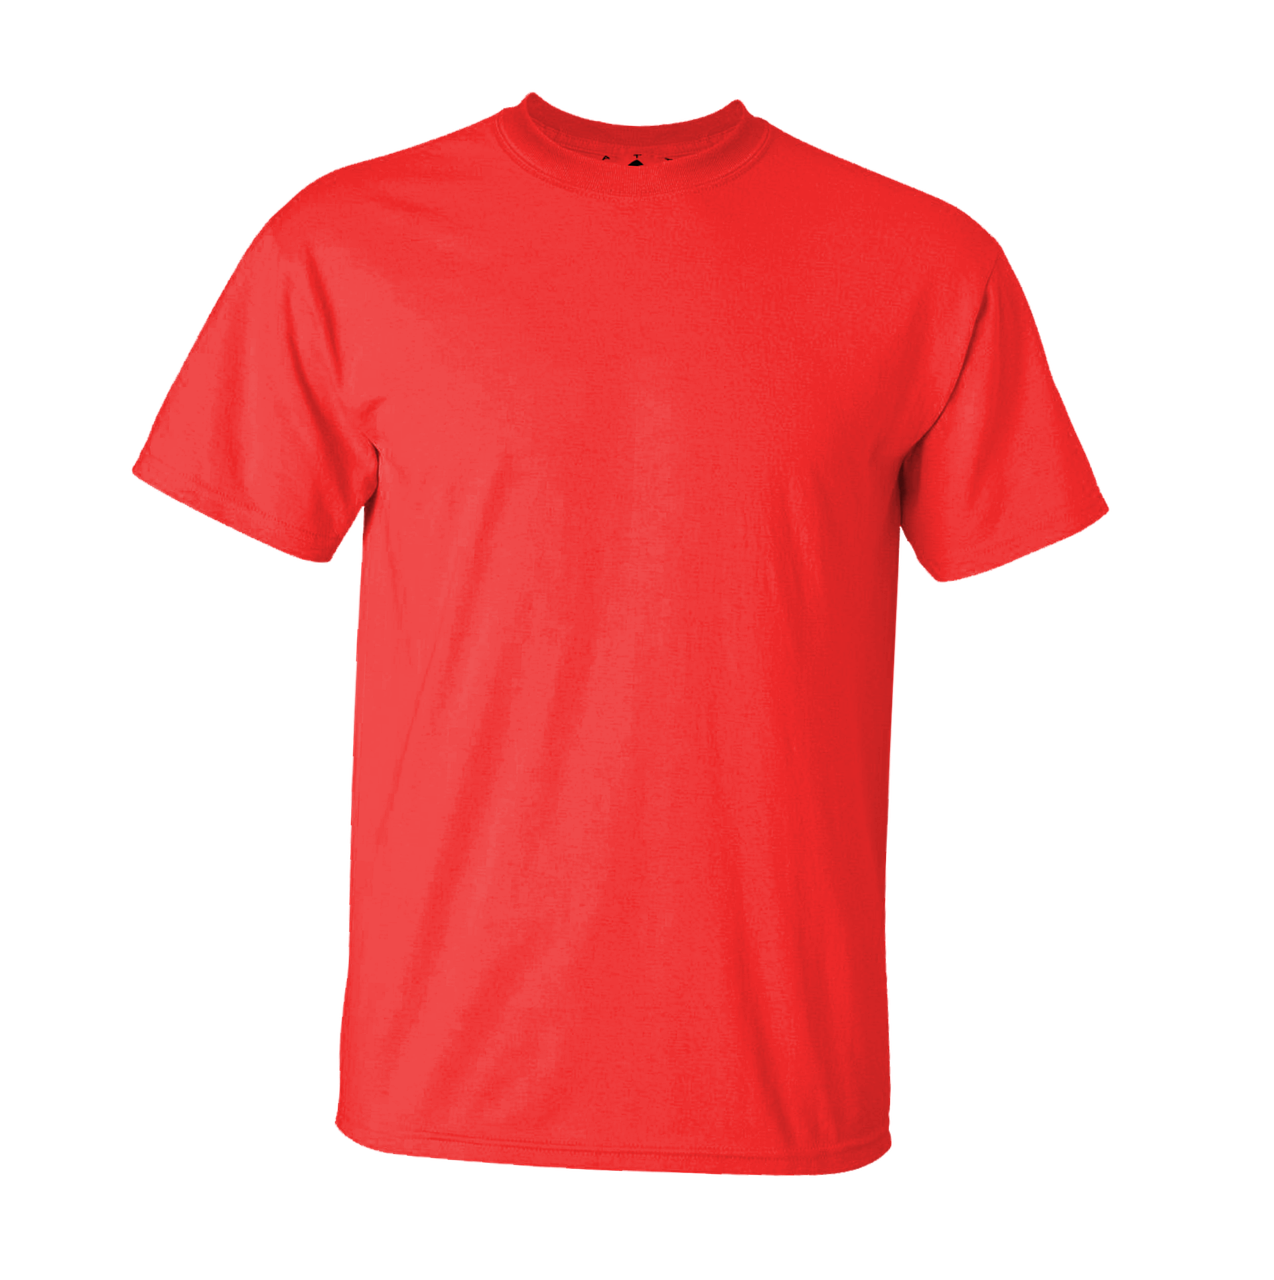 a red t - shirt on a black background, by Tom Carapic, renaissance, brawny, tx, cad, display item